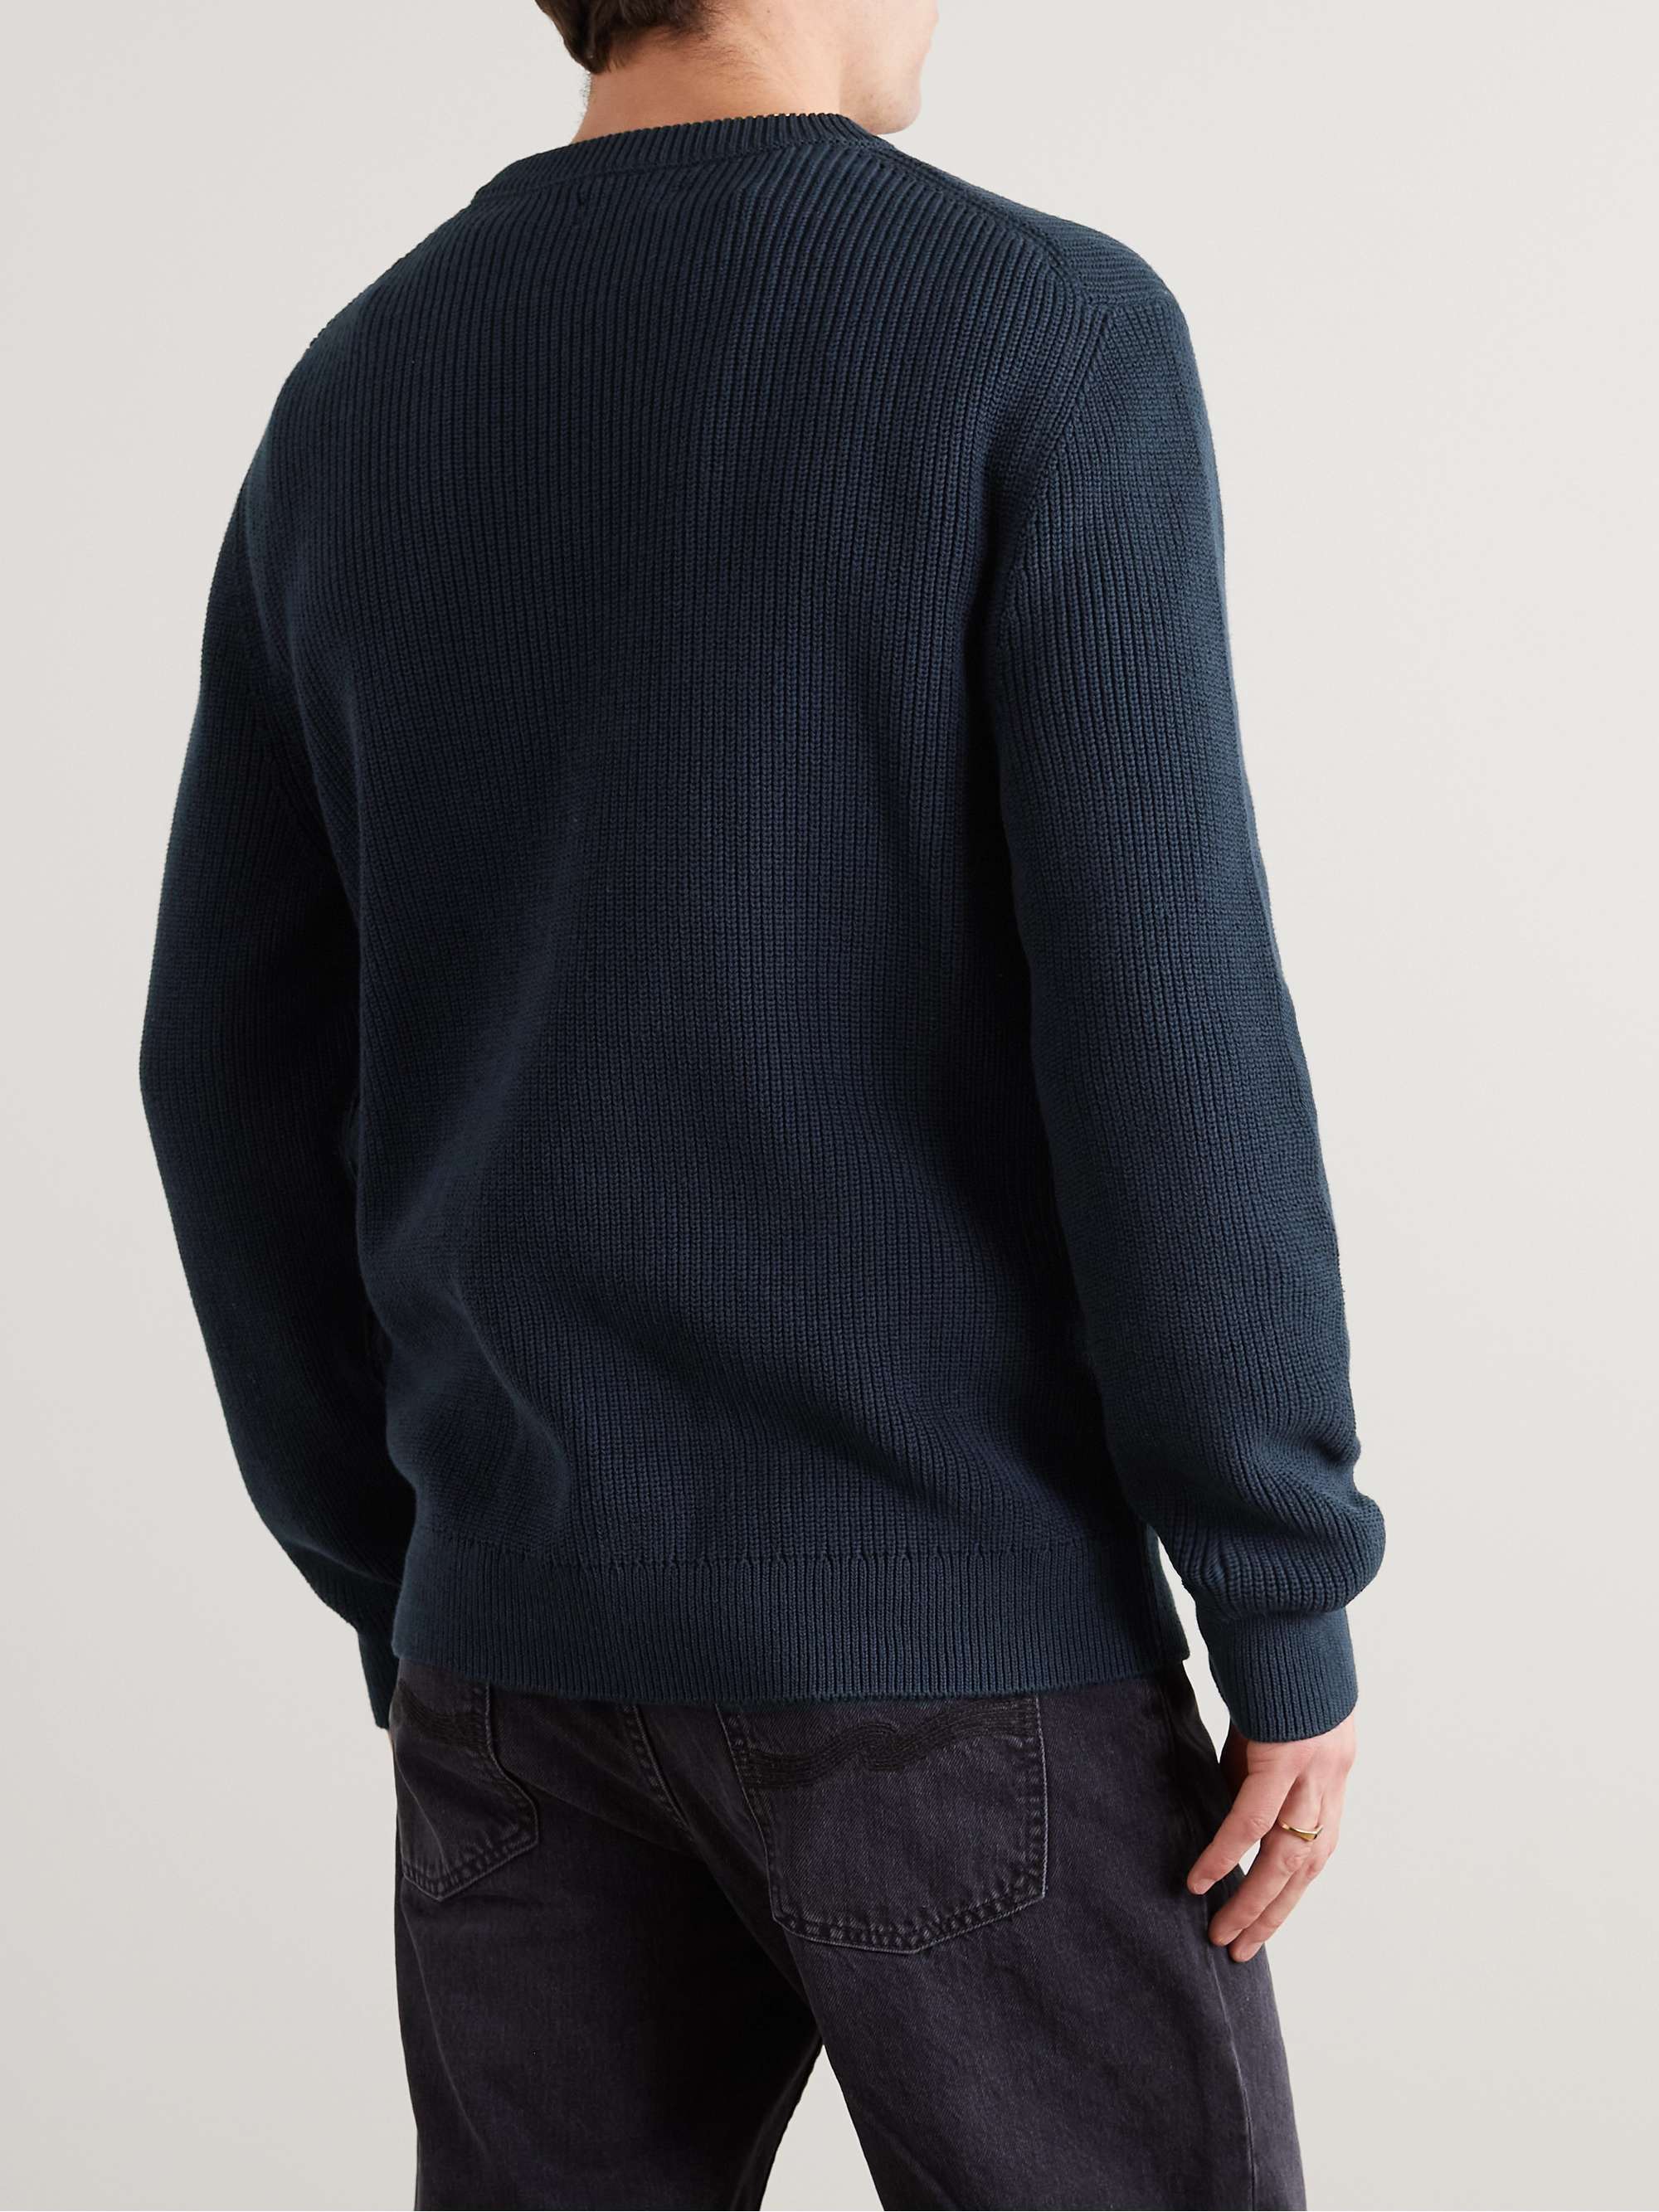 NUDIE JEANS August Ribbed Cotton Sweater for Men | MR PORTER